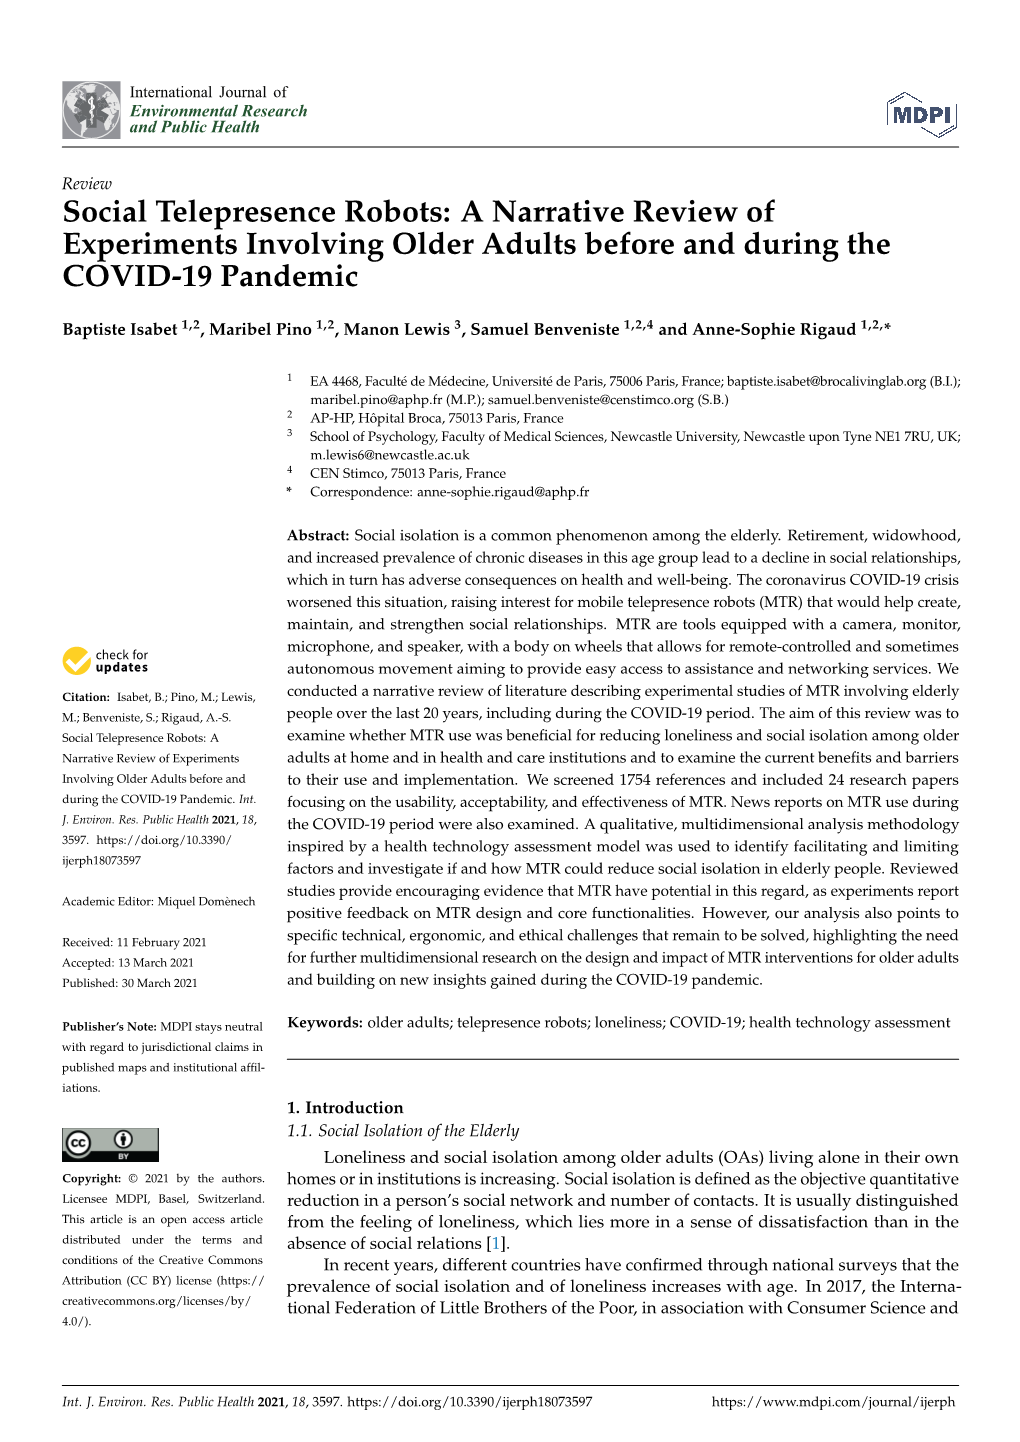 Social Telepresence Robots: a Narrative Review of Experiments Involving Older Adults Before and During the COVID-19 Pandemic